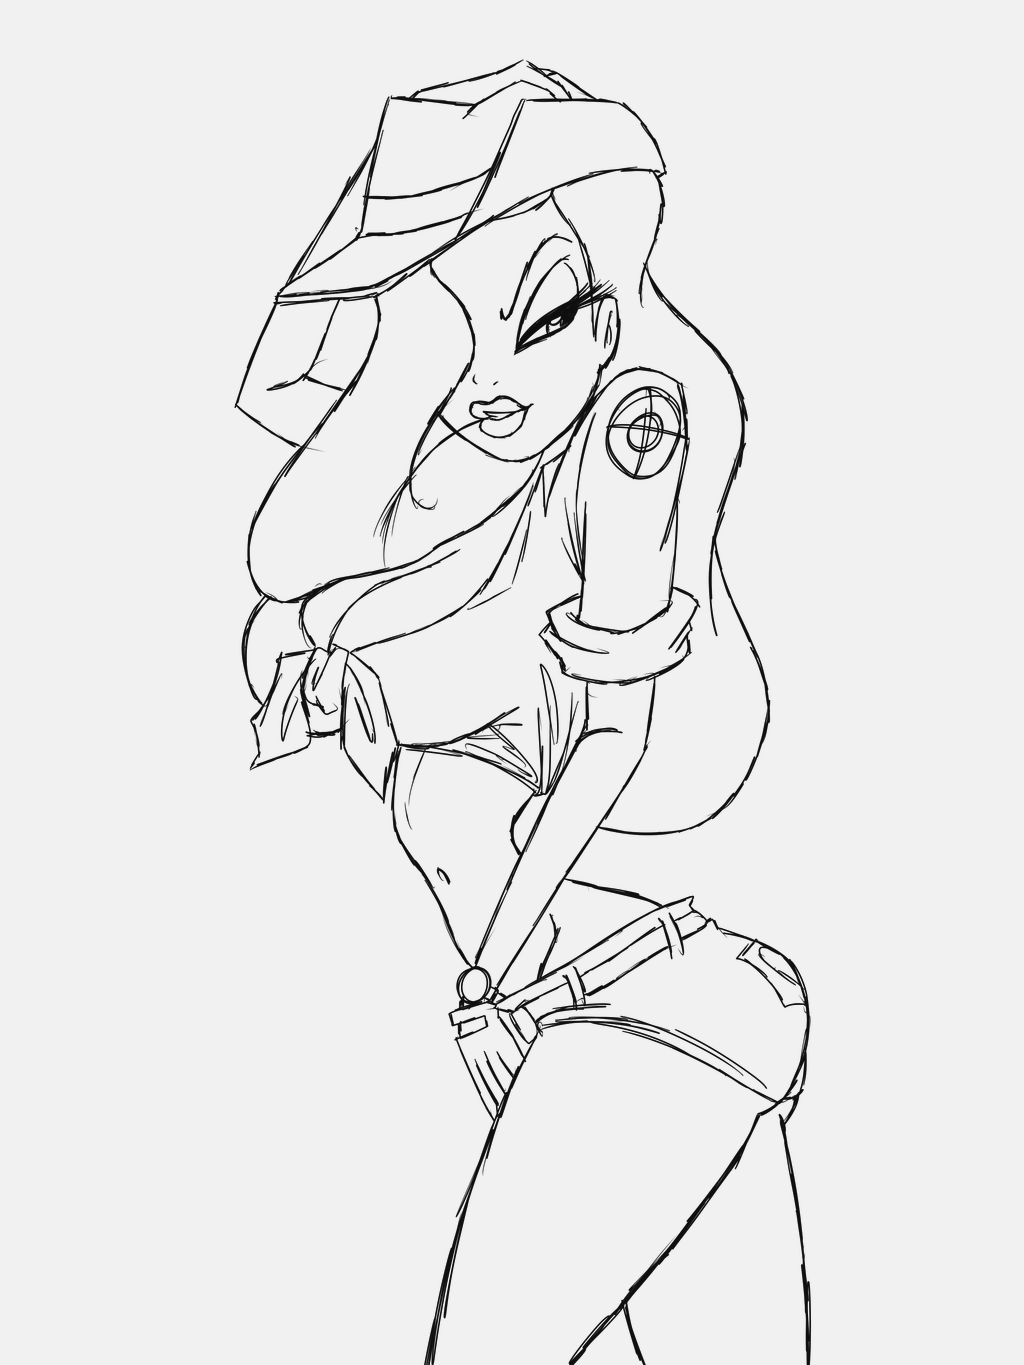 The Best Free Pinup Drawing Images Download From 232 Sketch Coloring Page.